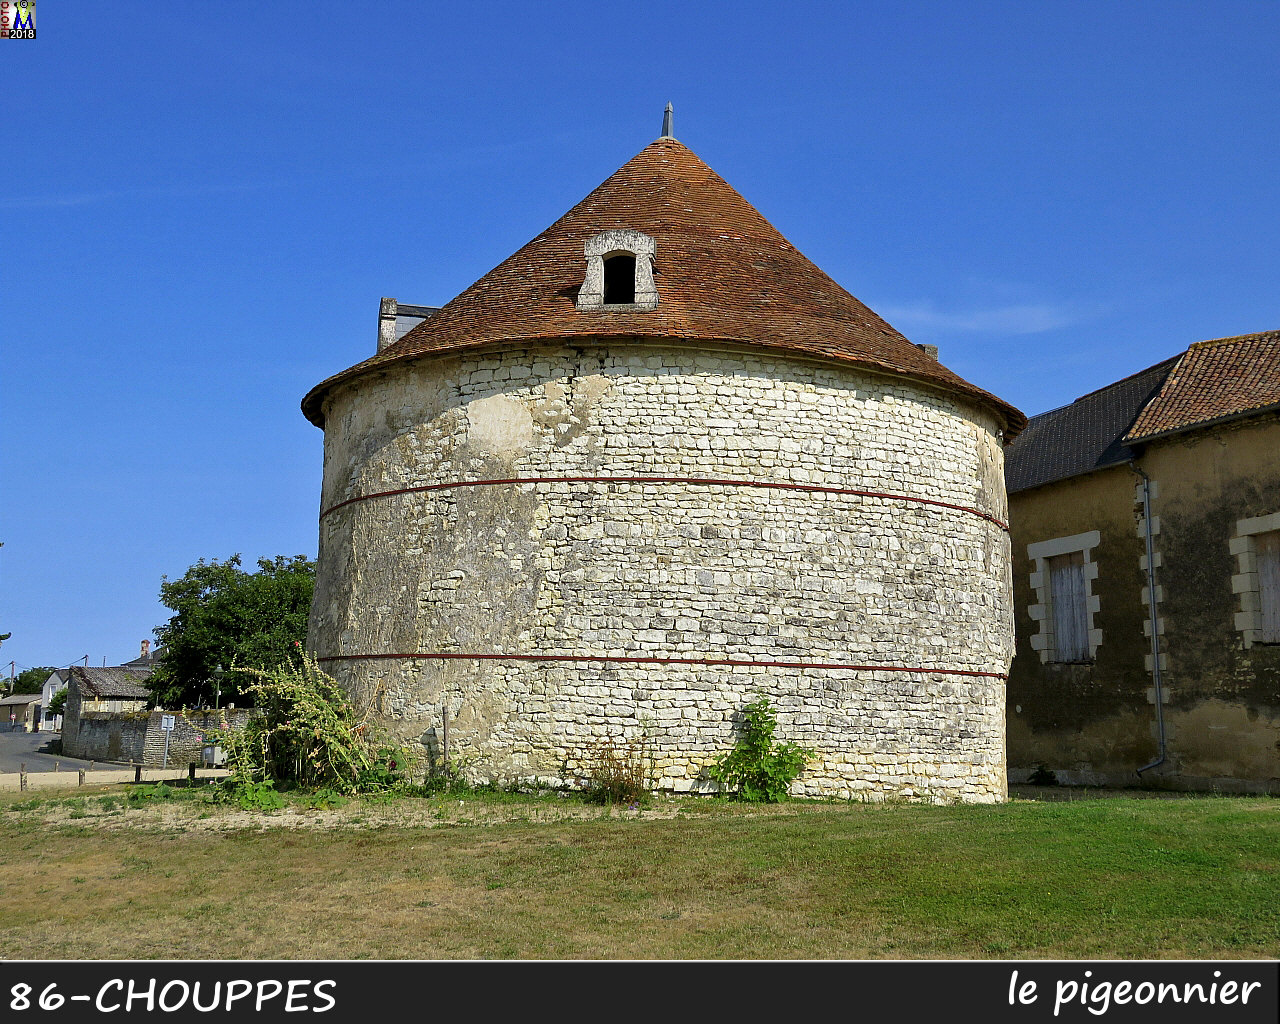 86CHOUPPES_pigeonnier_1002.jpg